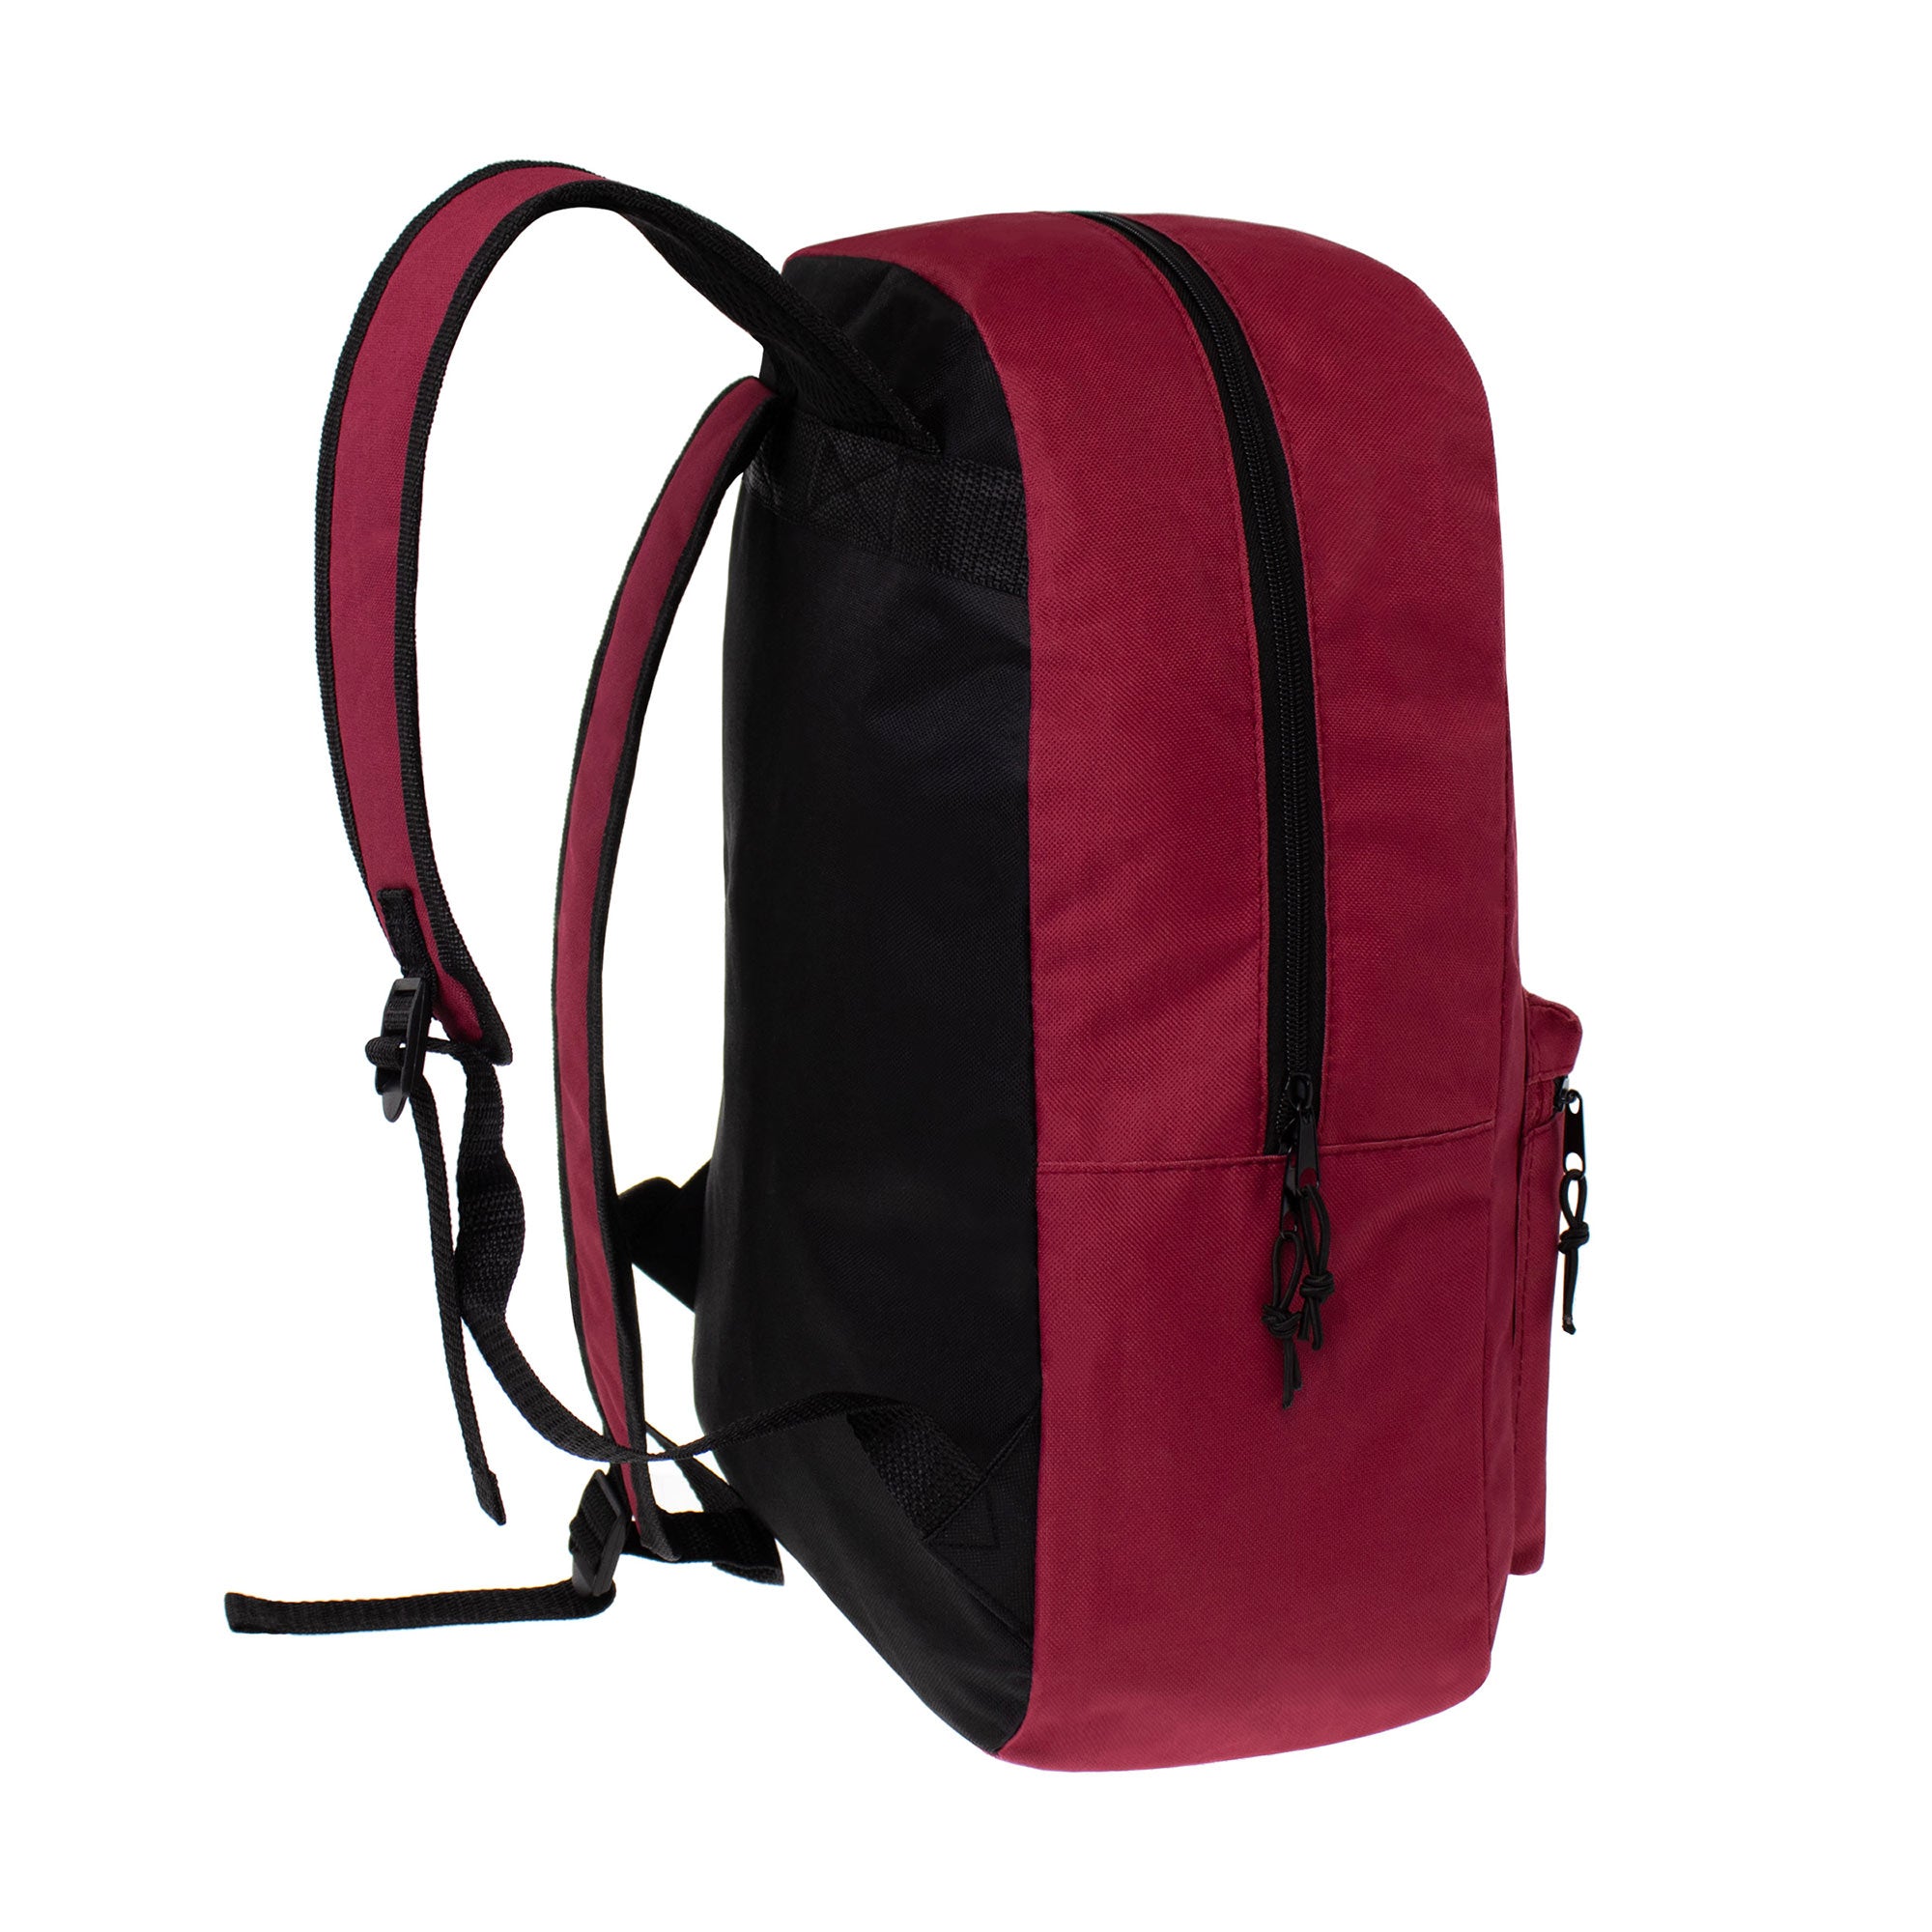 15 inch wholesale backpack for kids or adults